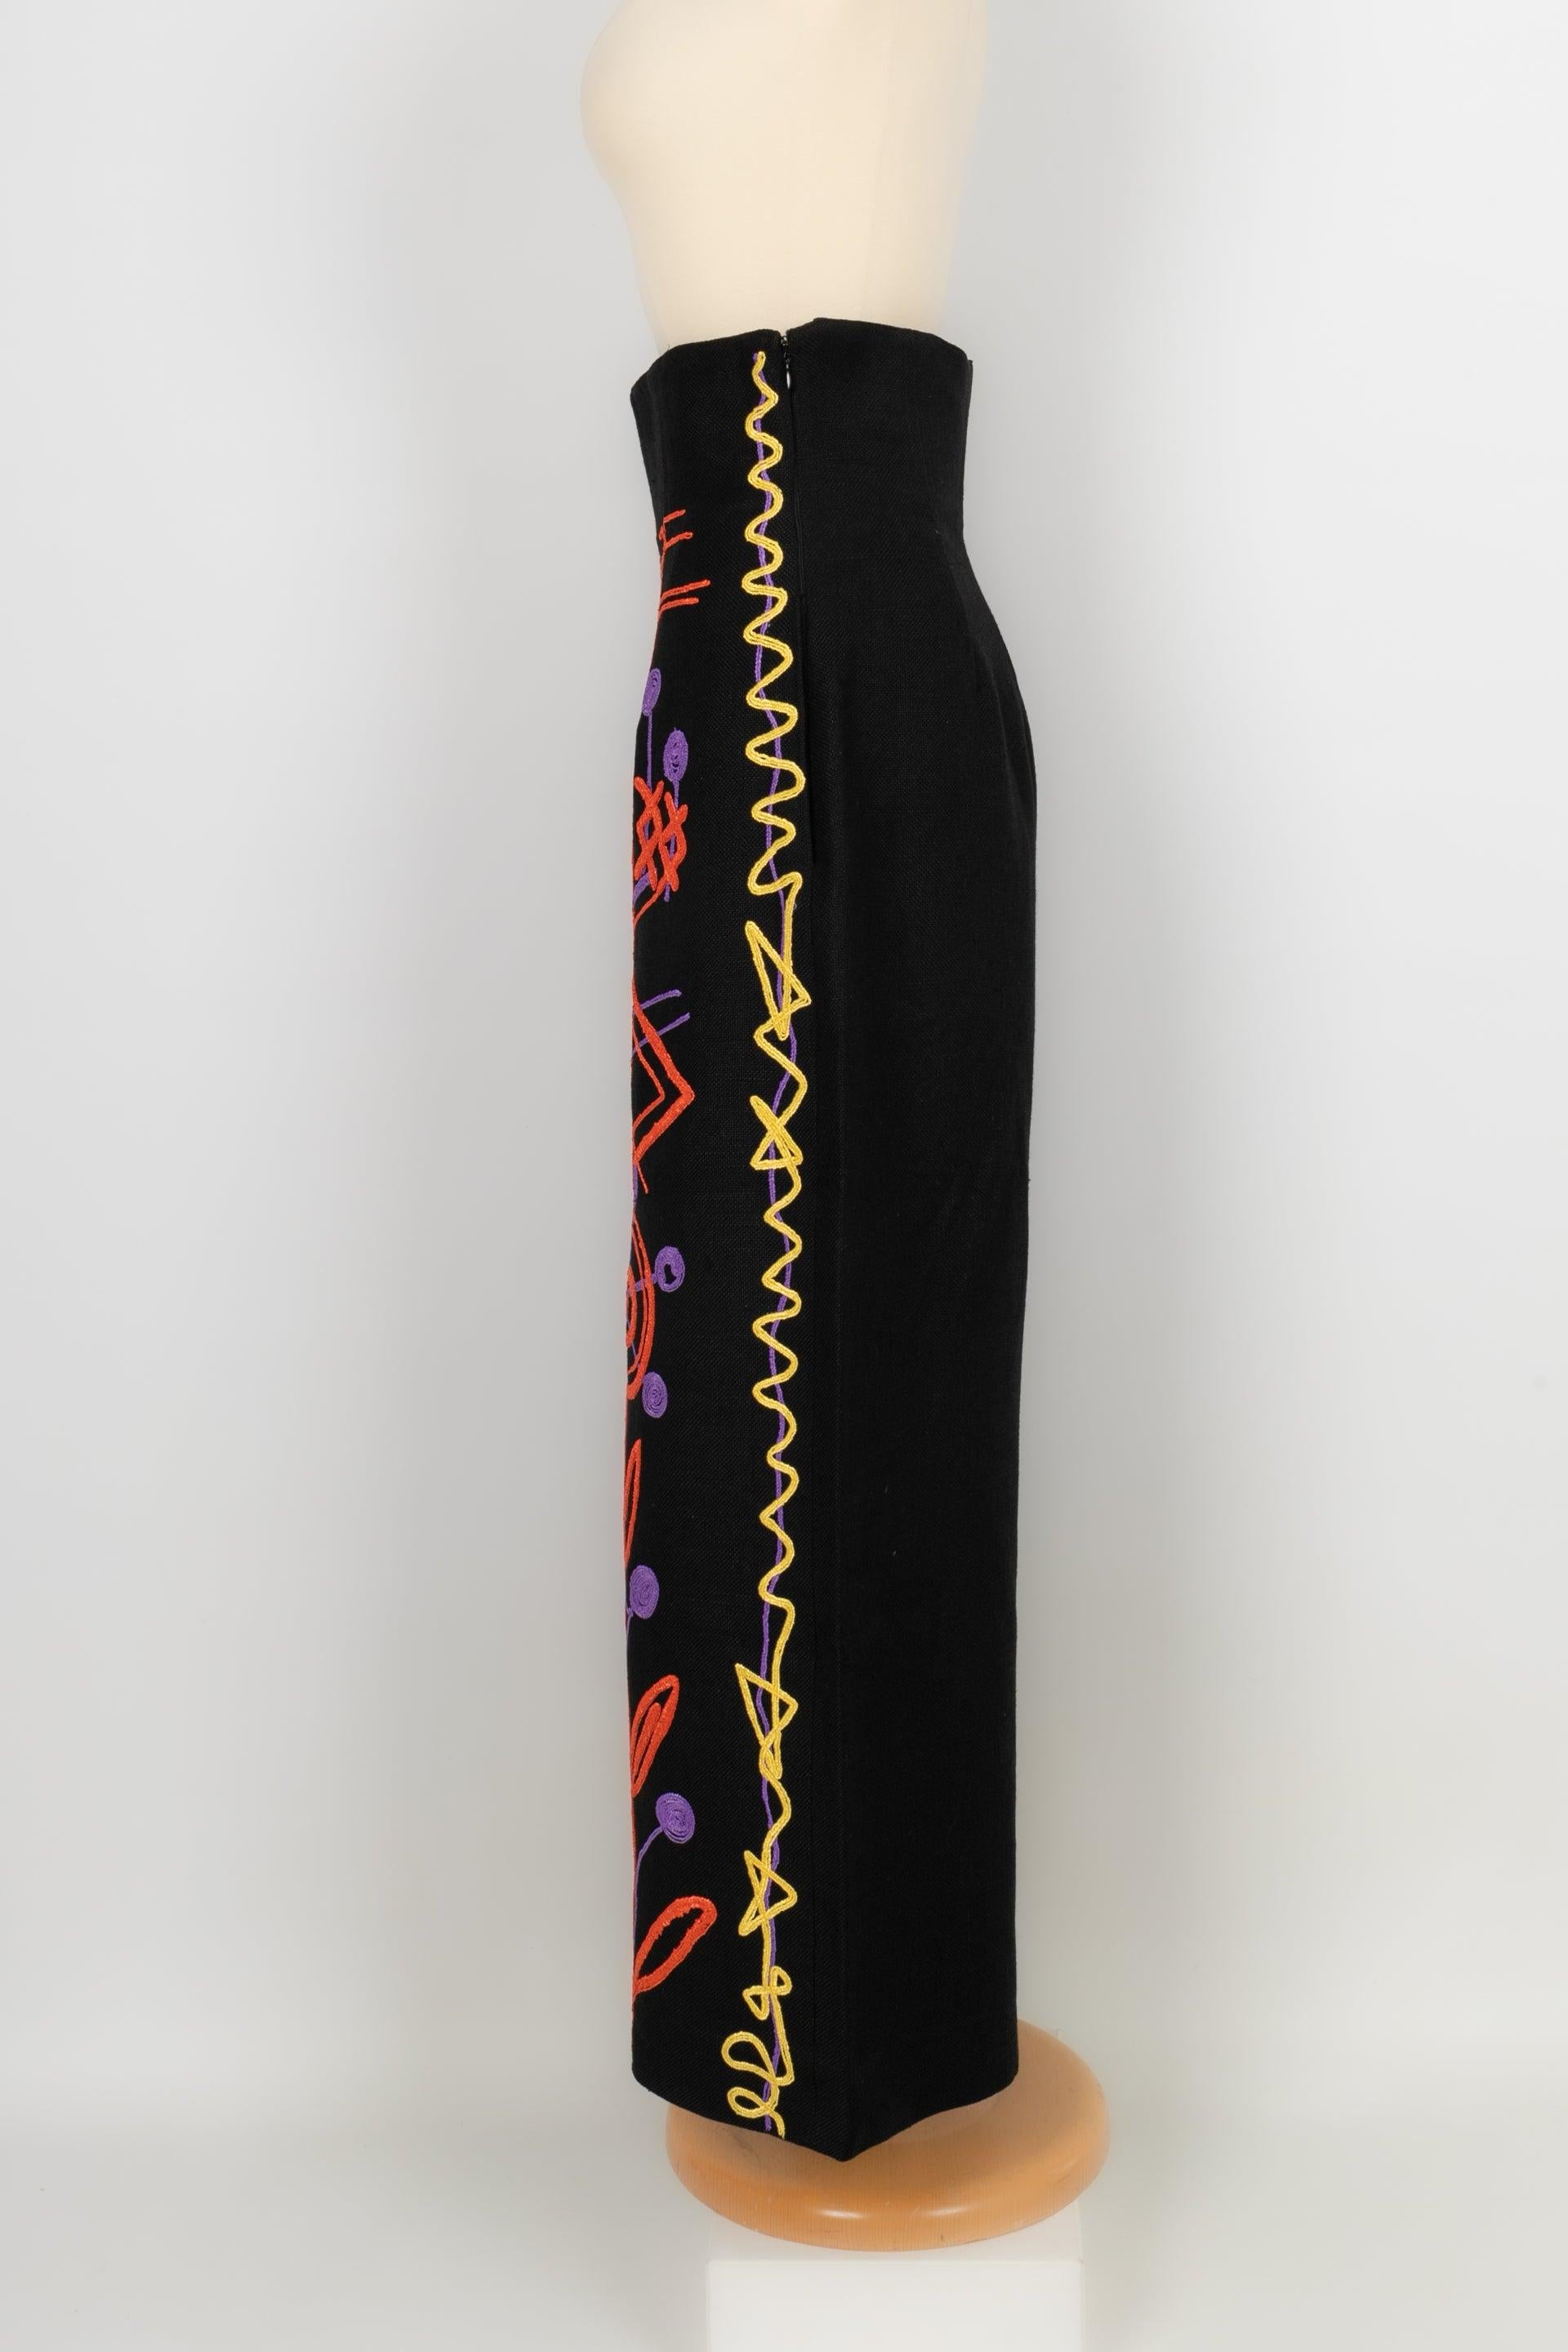 Christian Lacroix - (Made in France) Black linen pants embroidered with multicolored patterns. Indicated size 38FR. Spring-Summer 1993 Ready-to-Wear Collection.

Additional information:
Condition: Very good condition
Dimensions: Waist: 35 cm
Hips: